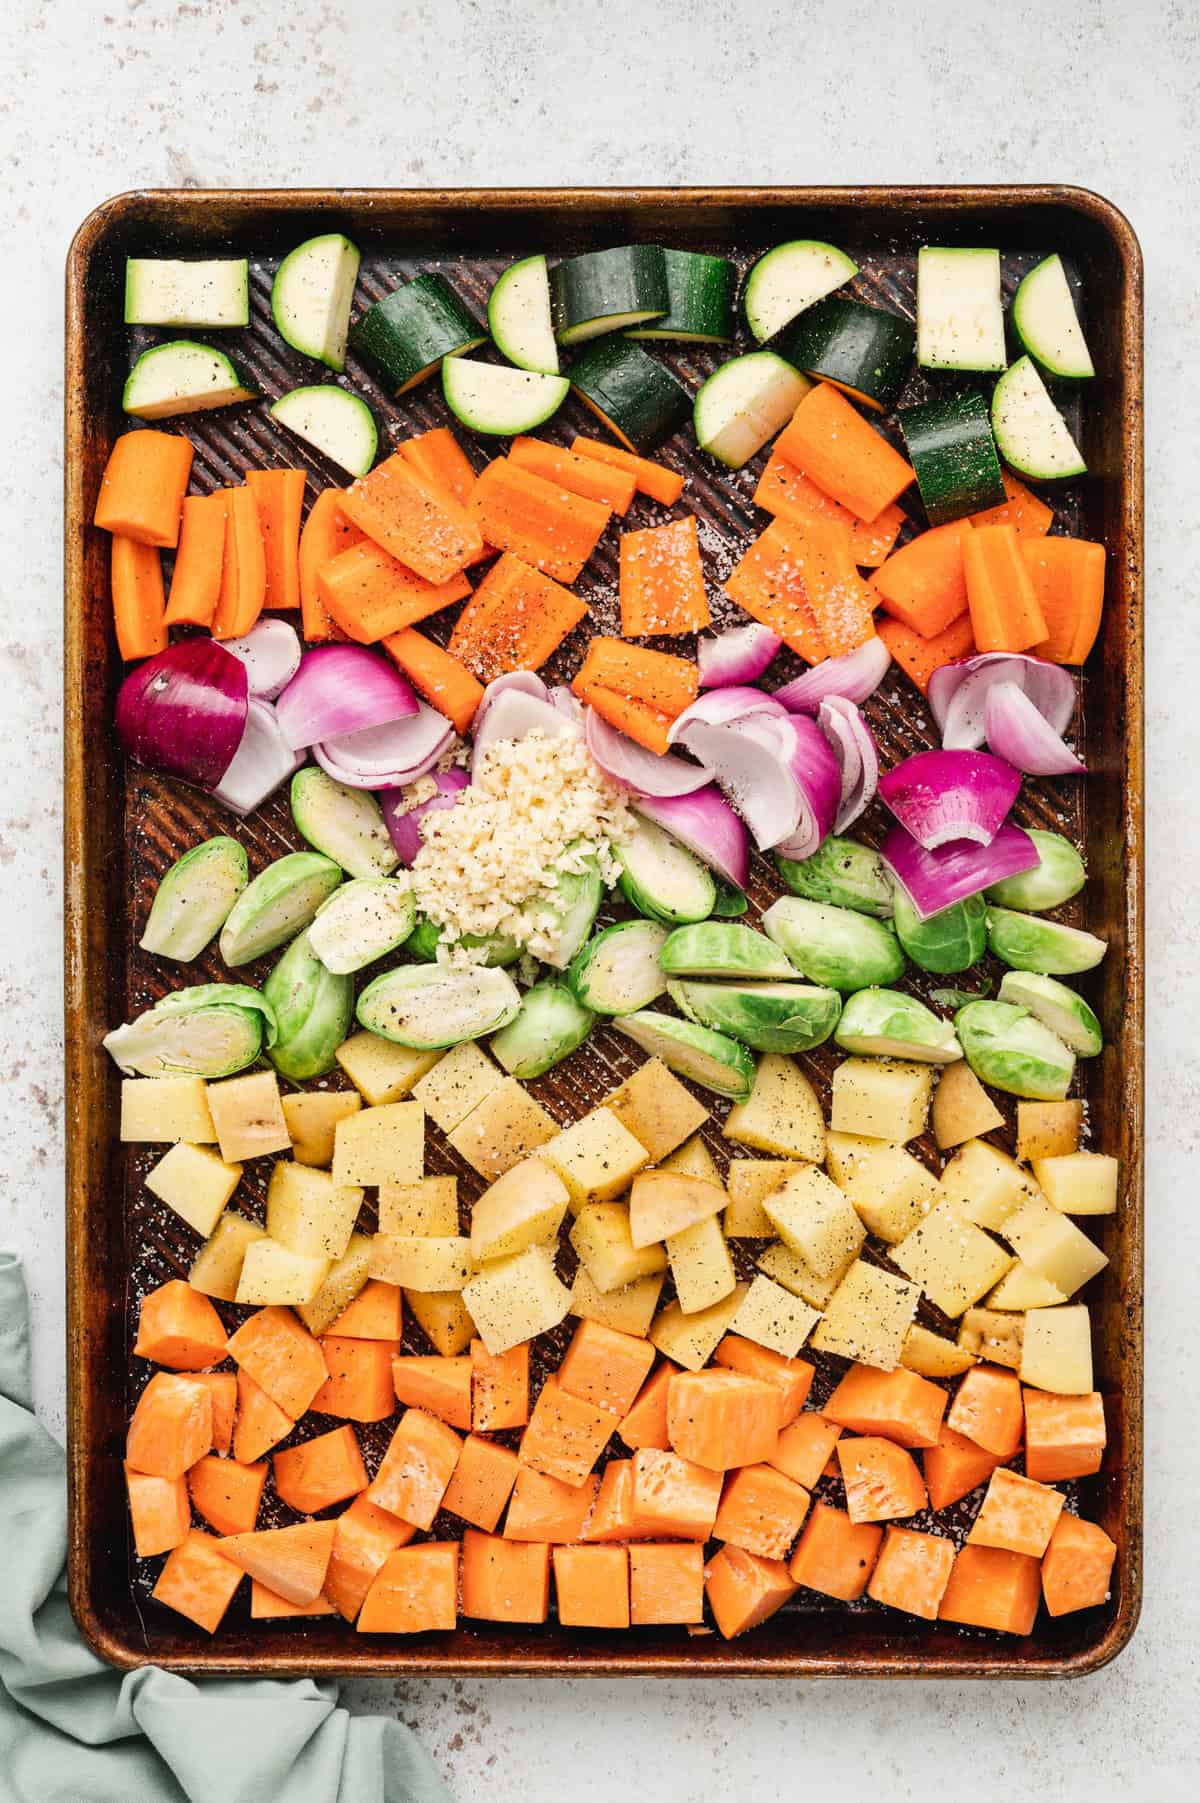 Cut and prepared vegetables on baking sheet for Roasted Vegetables recipe